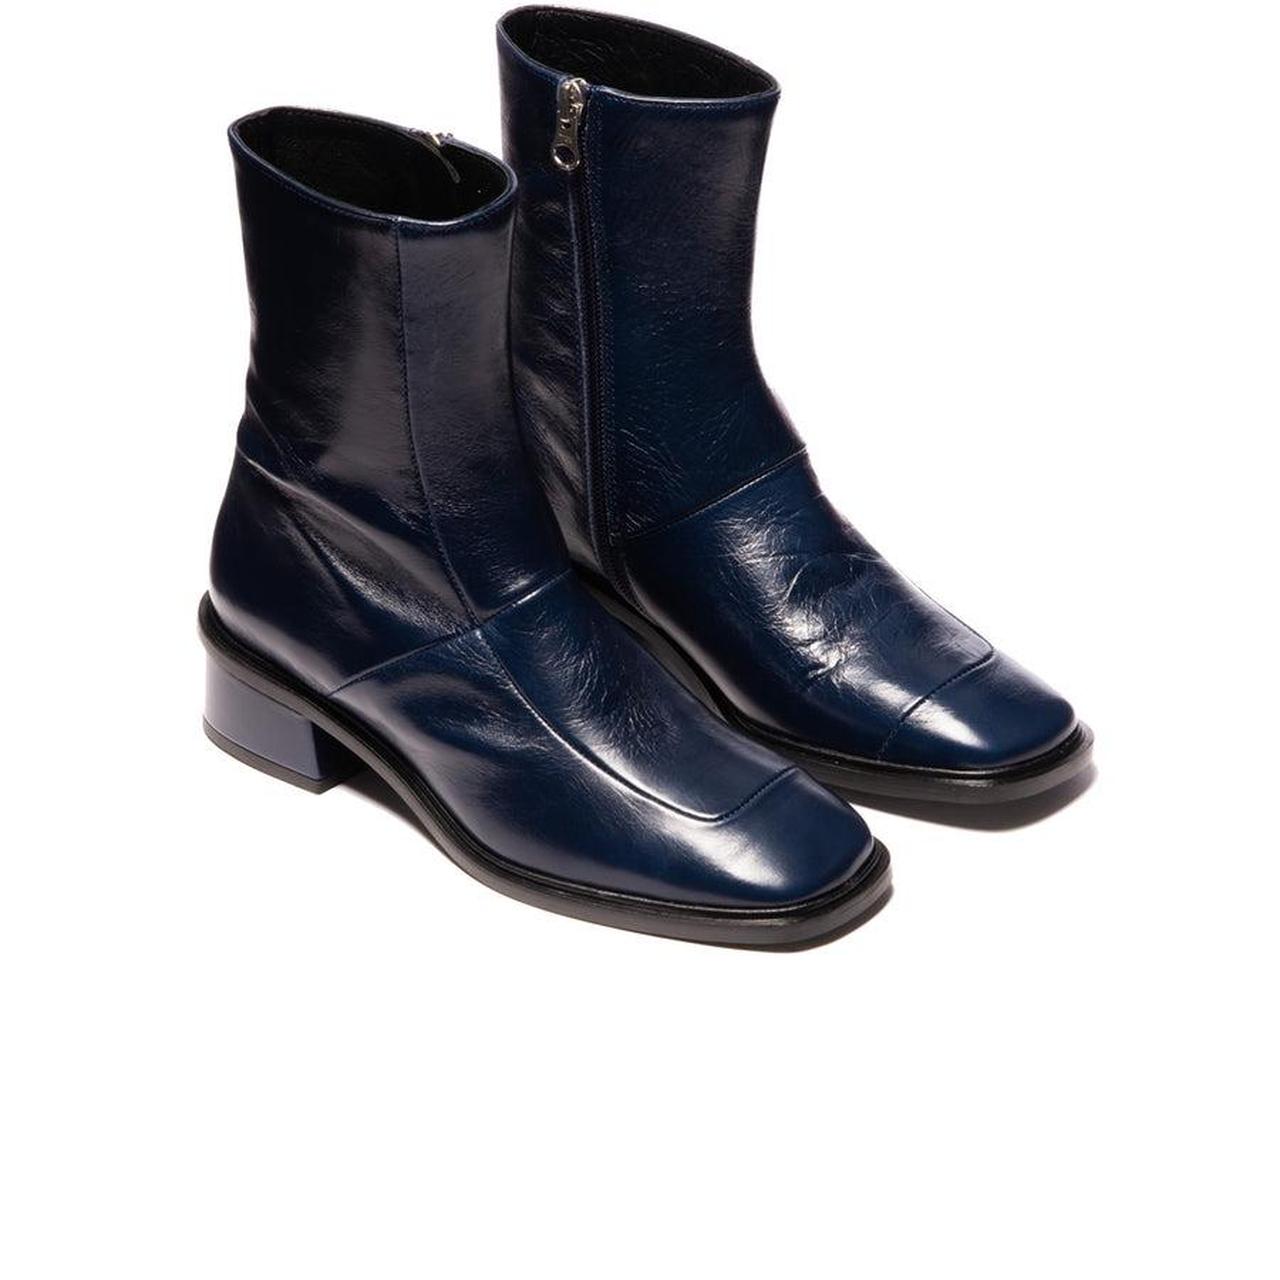 & Other Stories Women's Navy Boots (4)